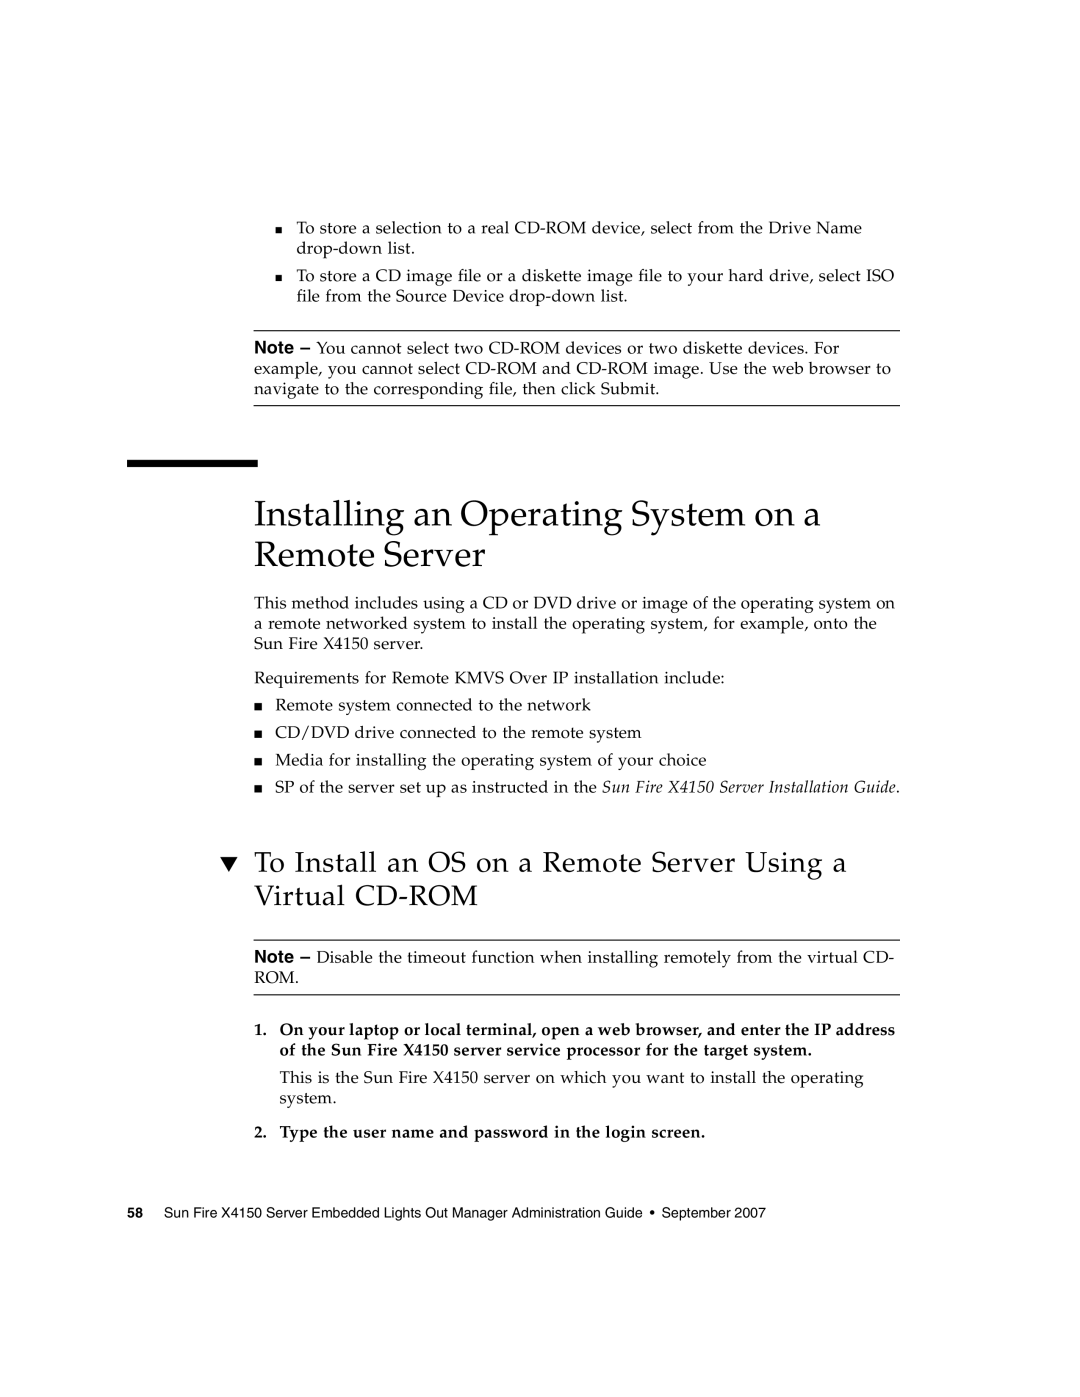 Sun Microsystems X4150 manual Installing an Operating System on a Remote Server 